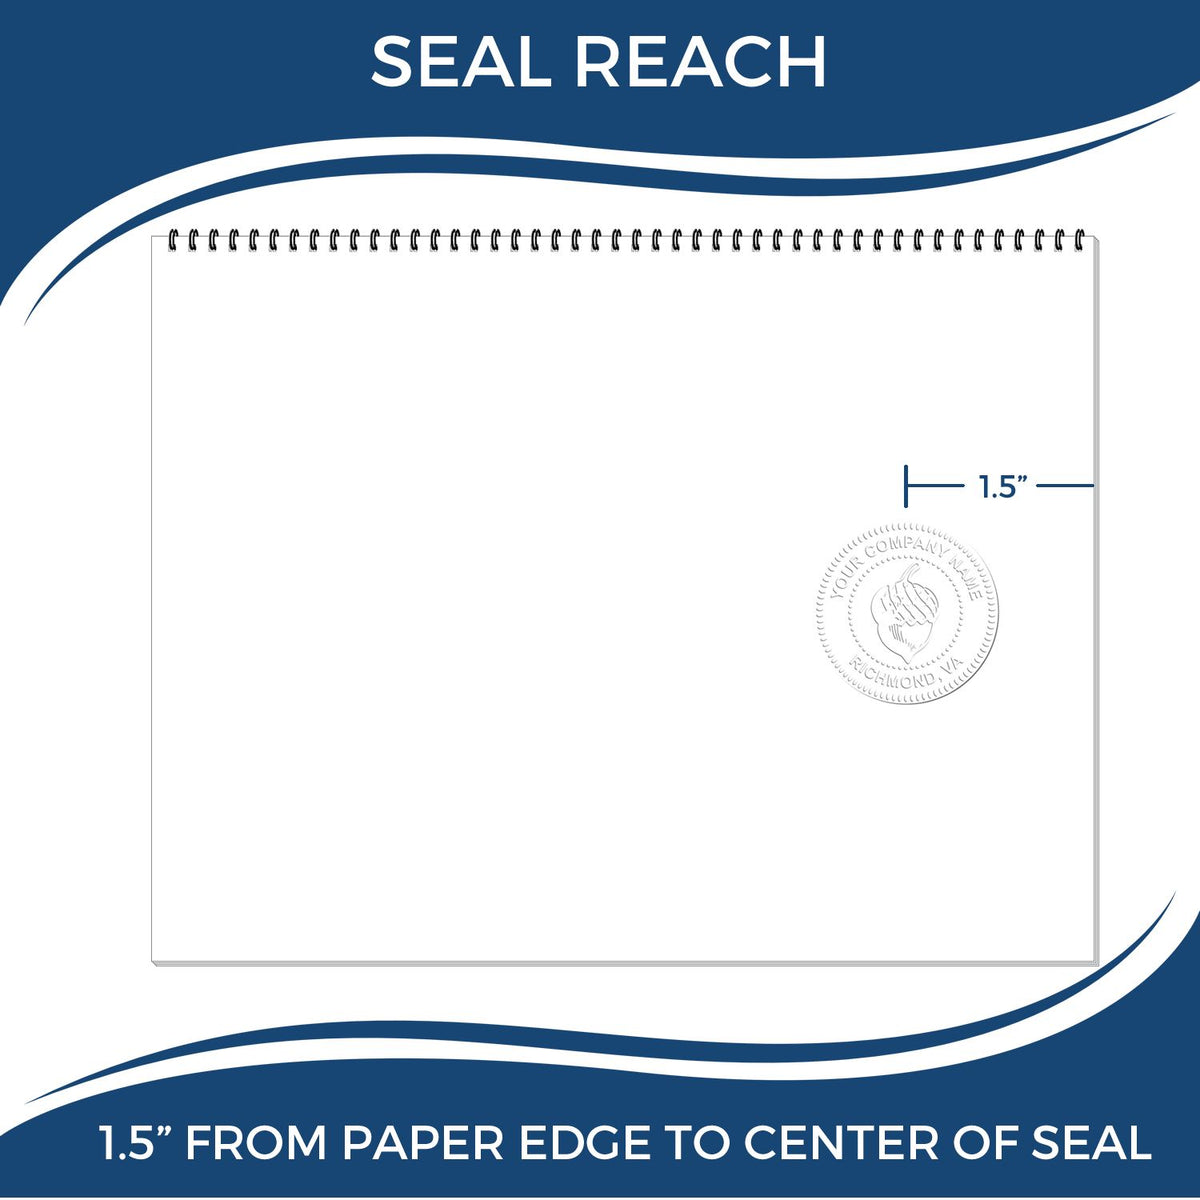 An infographic showing the seal reach which is represented by a ruler and a miniature seal image of the Hybrid Pennsylvania Geologist Seal